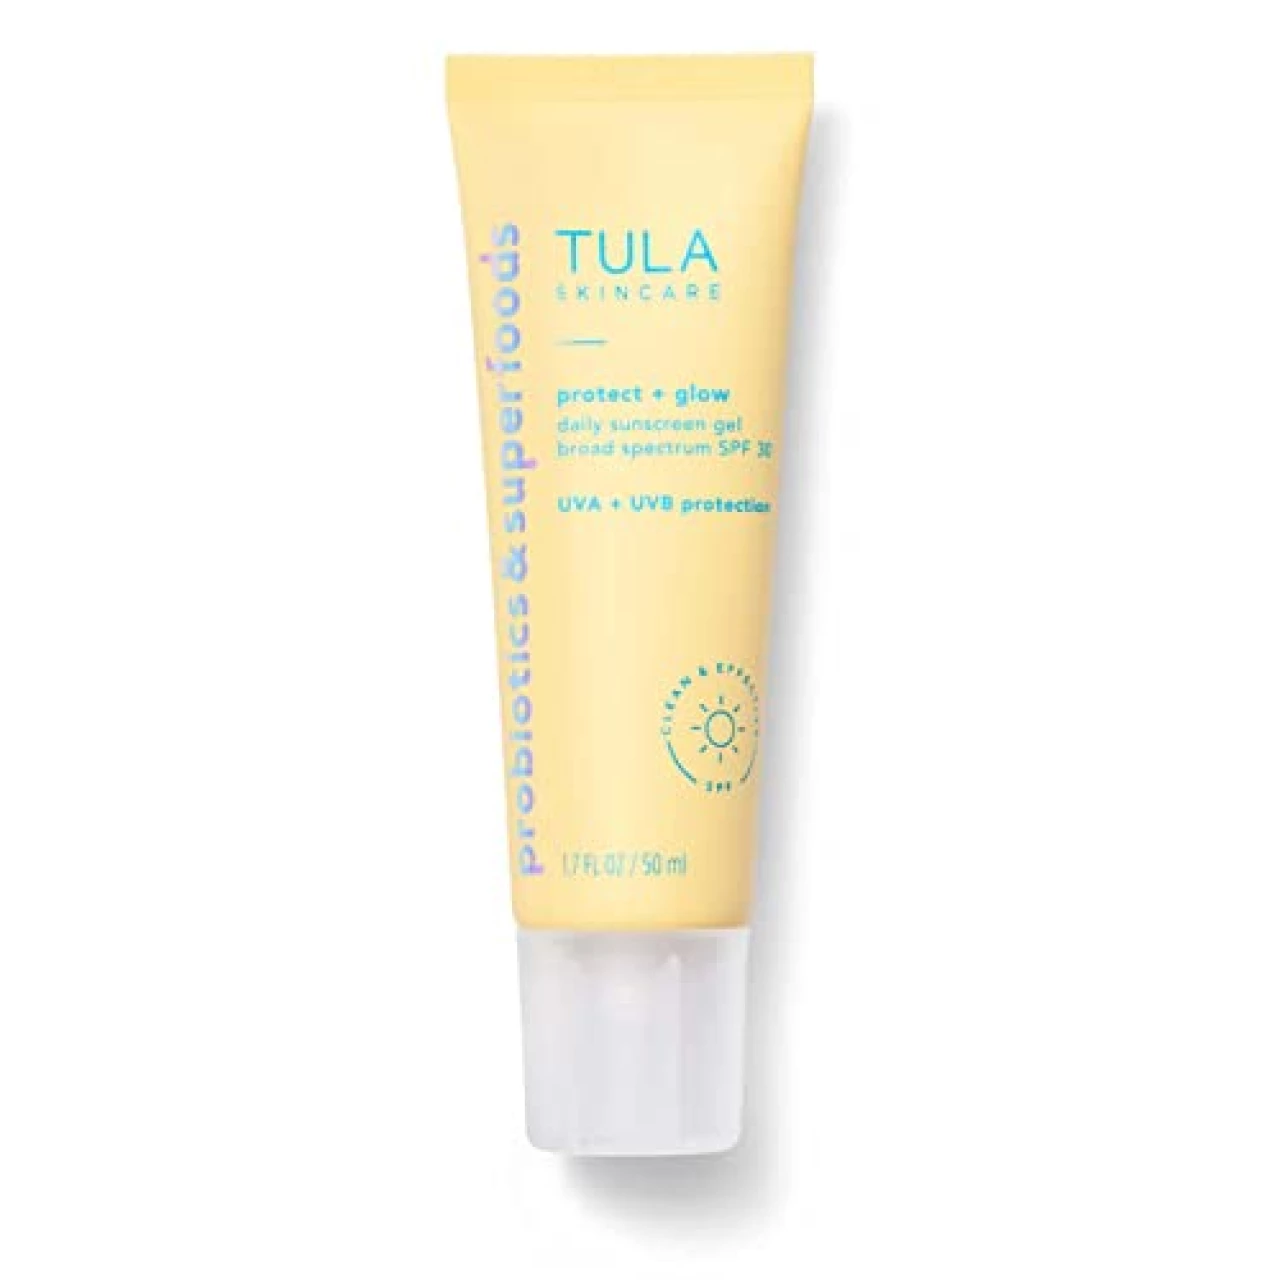 TULA Skin Care Protect + Glow Daily Sunscreen - Gel, Broad Spectrum SPF 30, Skincare-First, Non-Greasy, Non-Comedogenic and Reef-Safe with Pollution and Blue Light Protection, Regular, 1.7 fl oz.